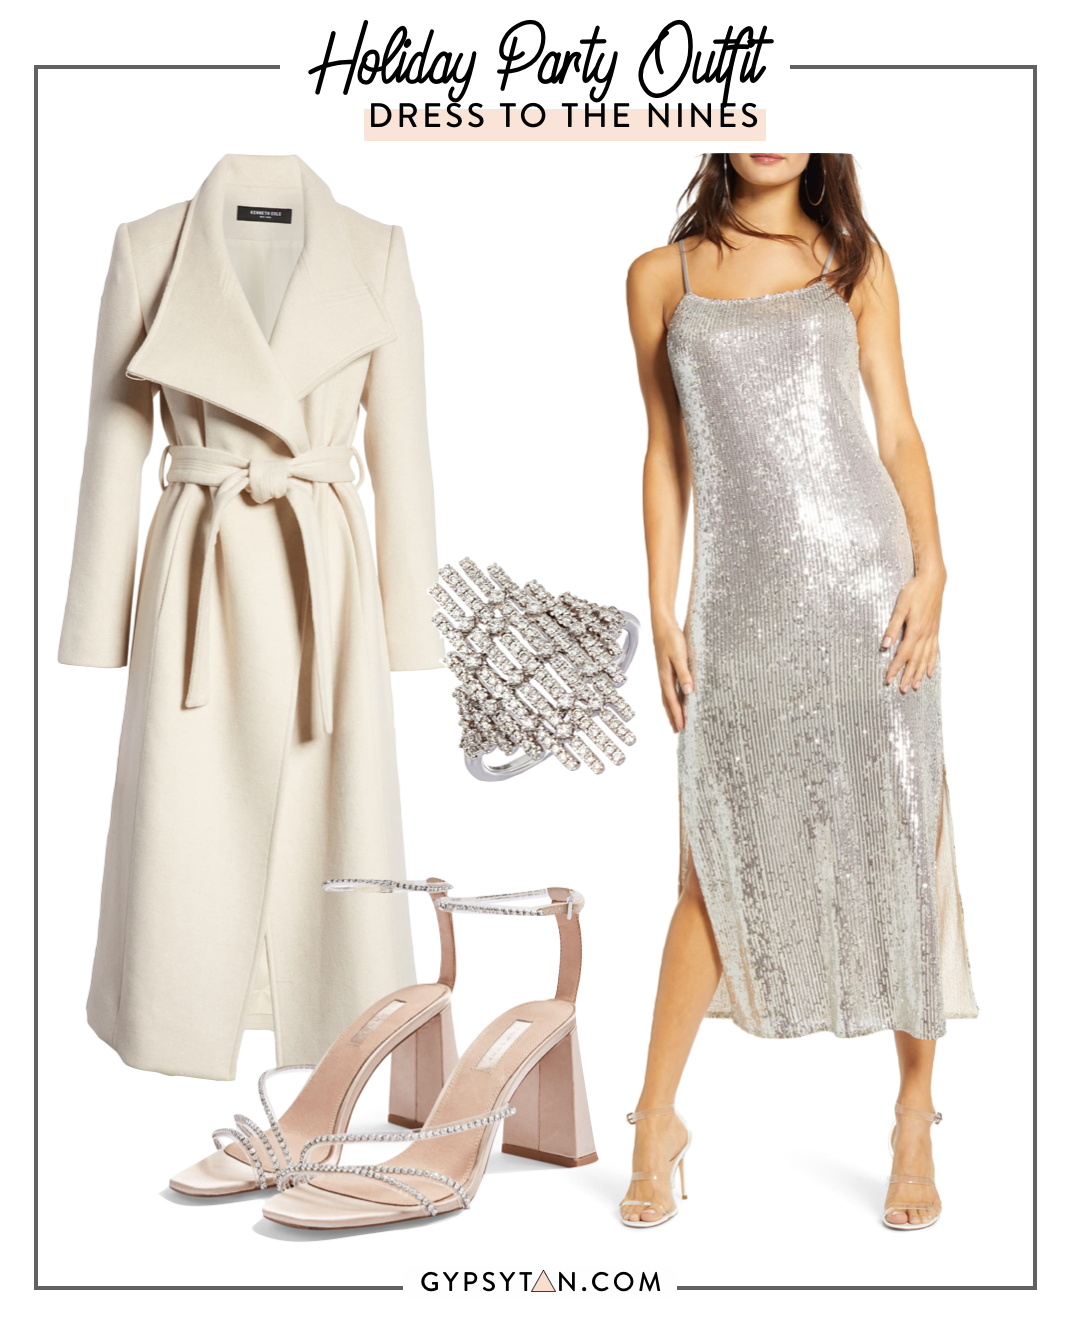 Holiday Party Outfit Ideas - Nordstrom - Sabrina Tan 5